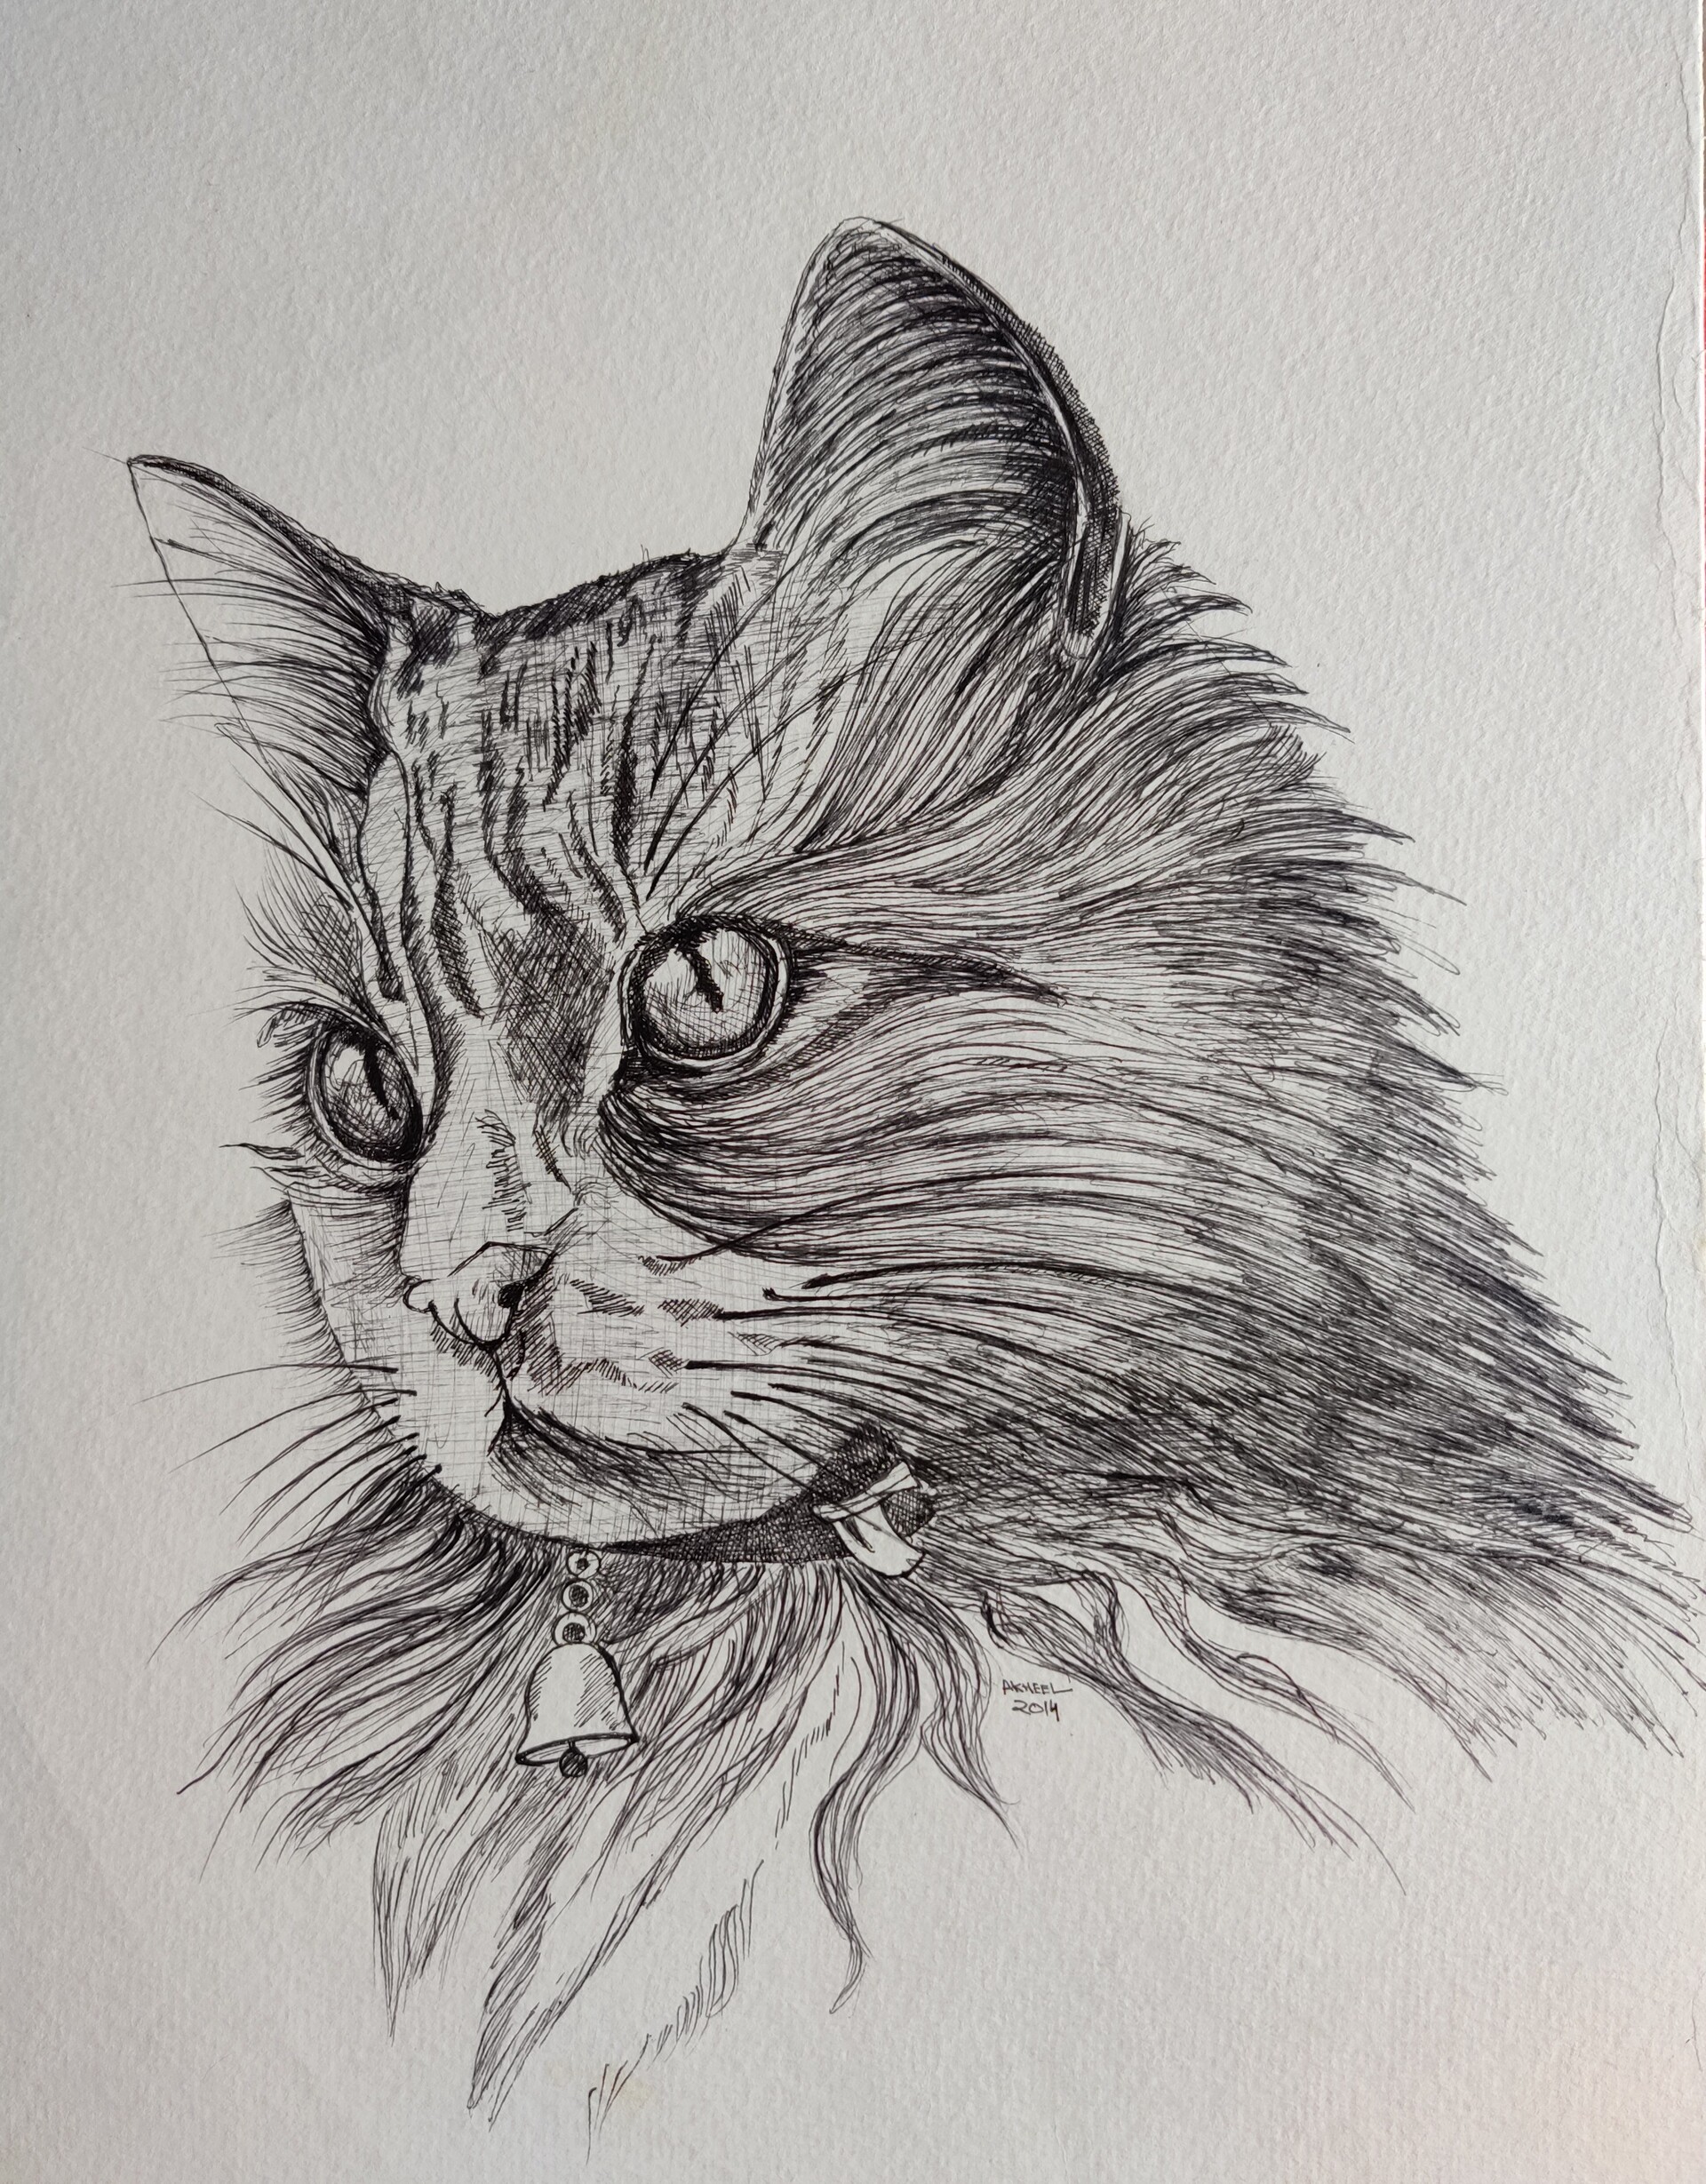 ArtStation Cat pen and ink drawing